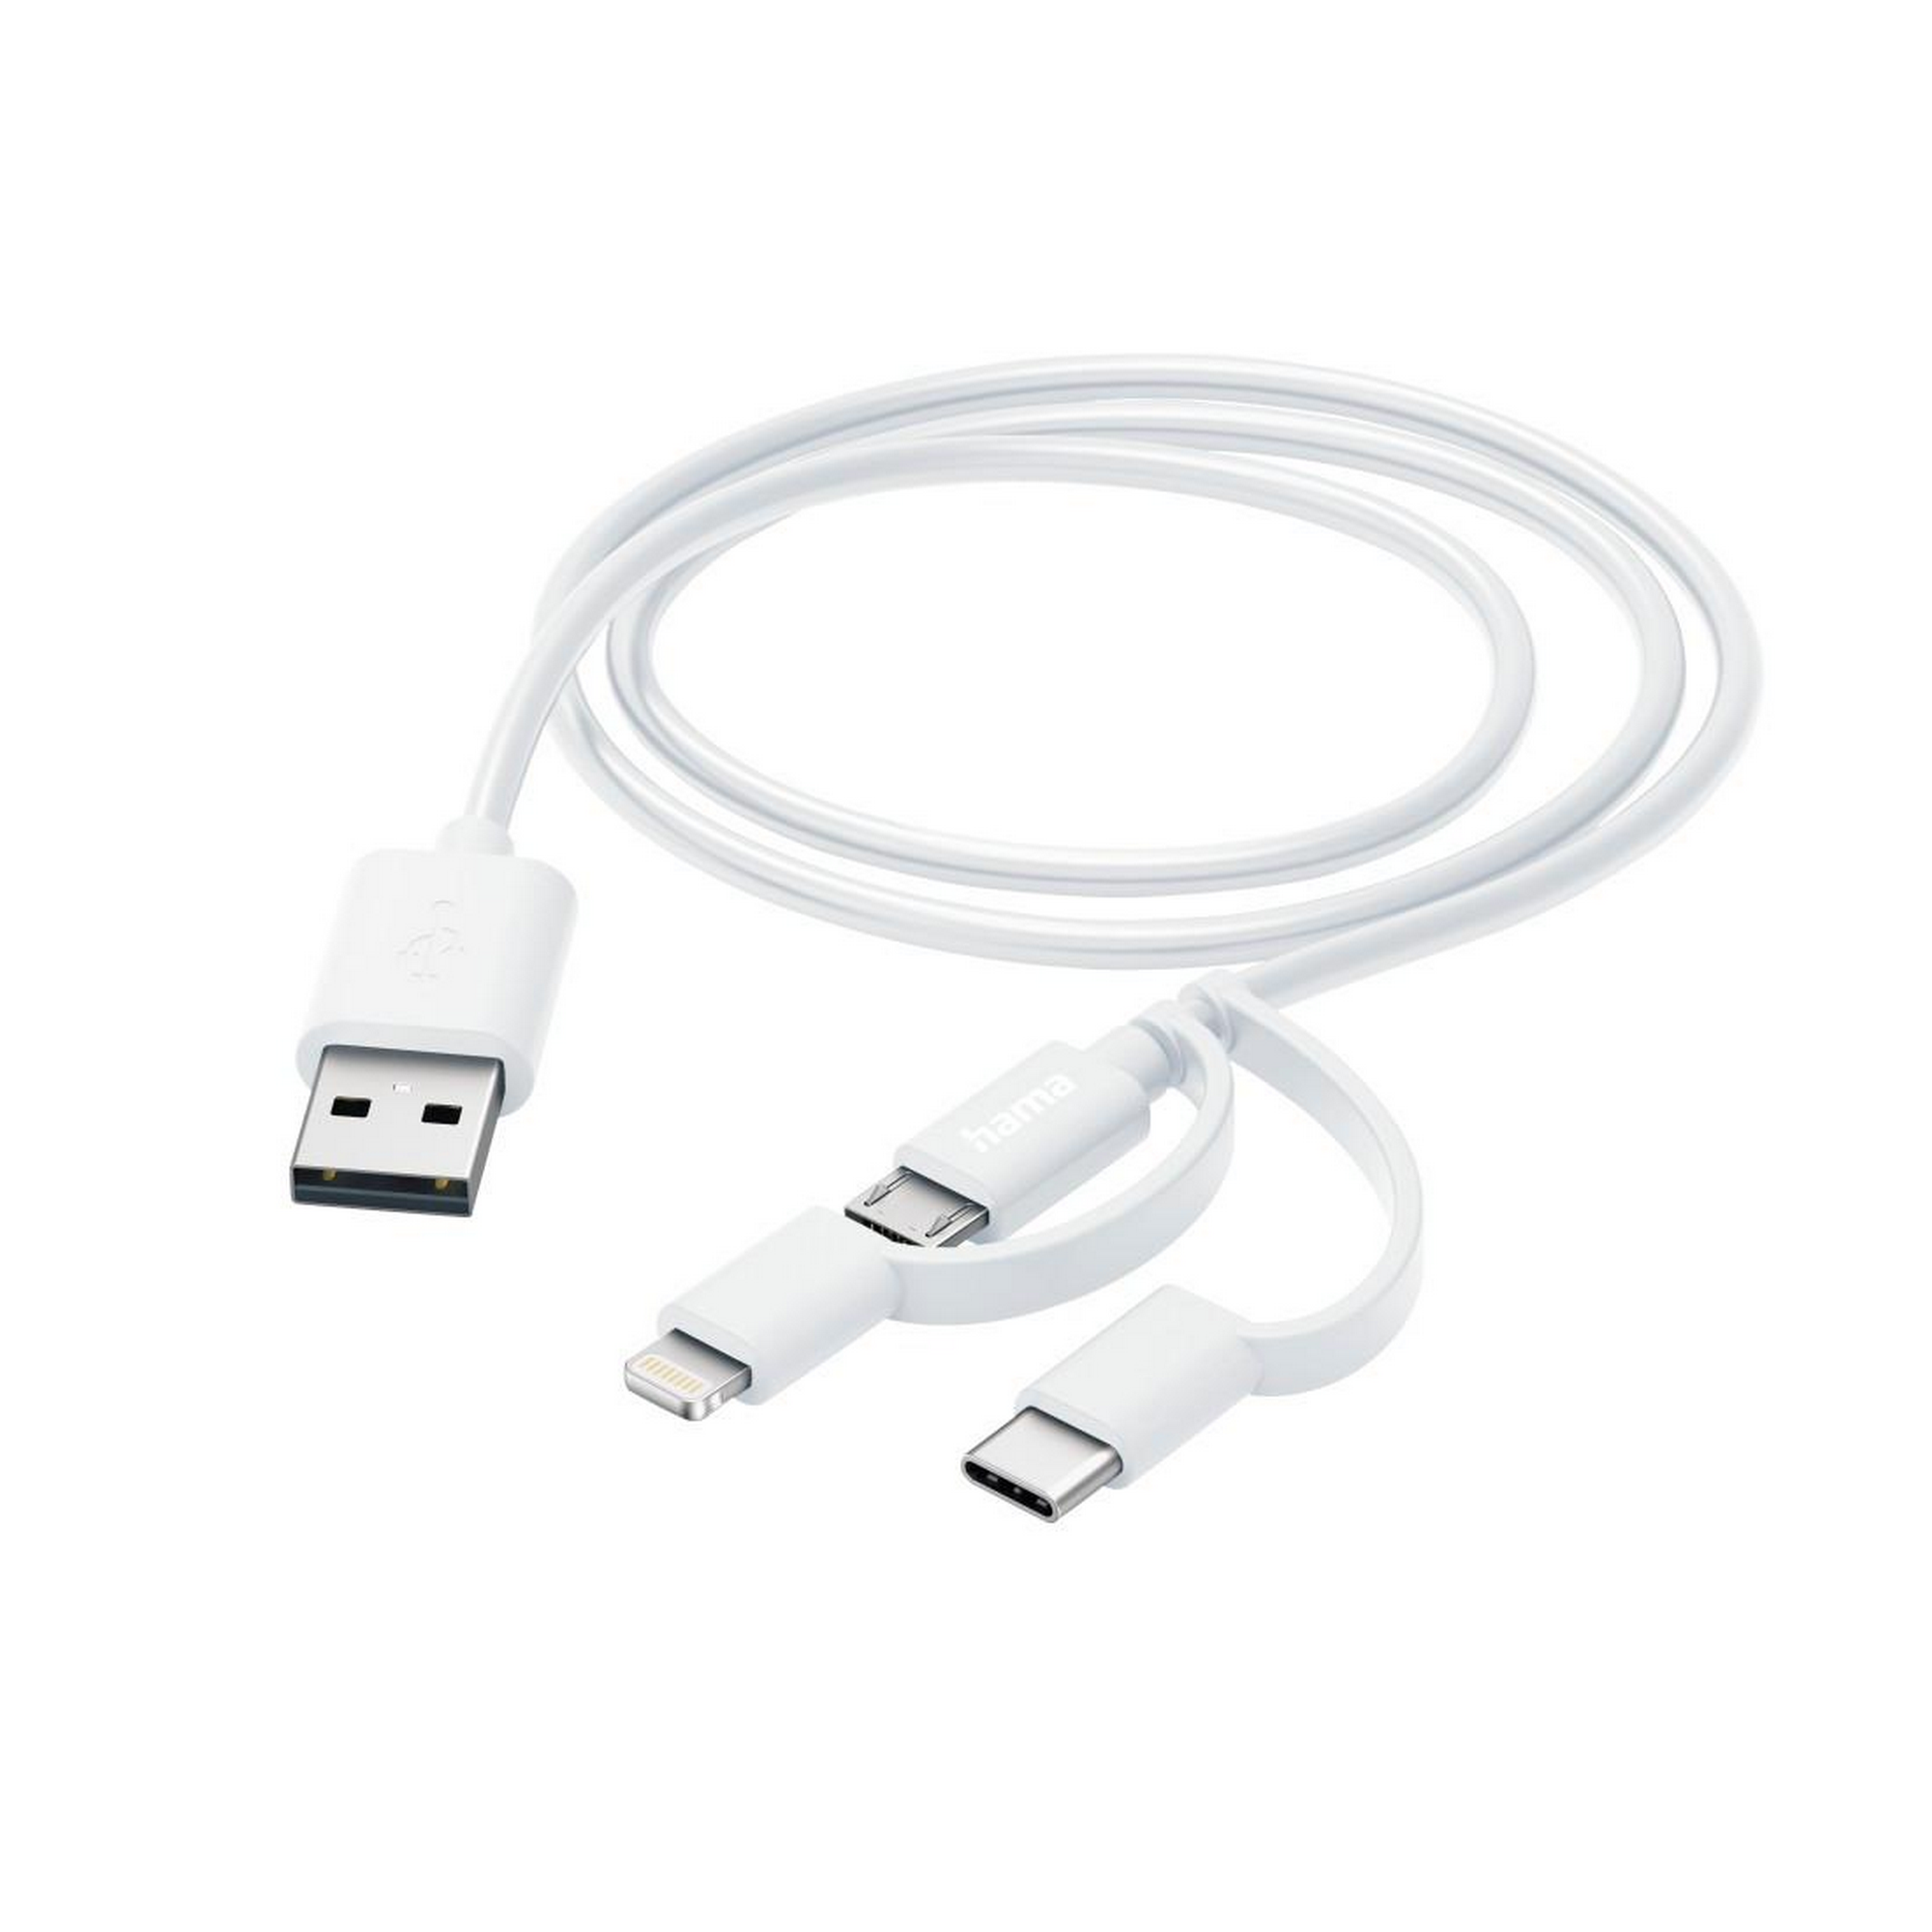 Multi-Ladekabel 3-in-1-weiß USB-A/ Micro-USB mit USB-C/Lightning 1 m + product picture